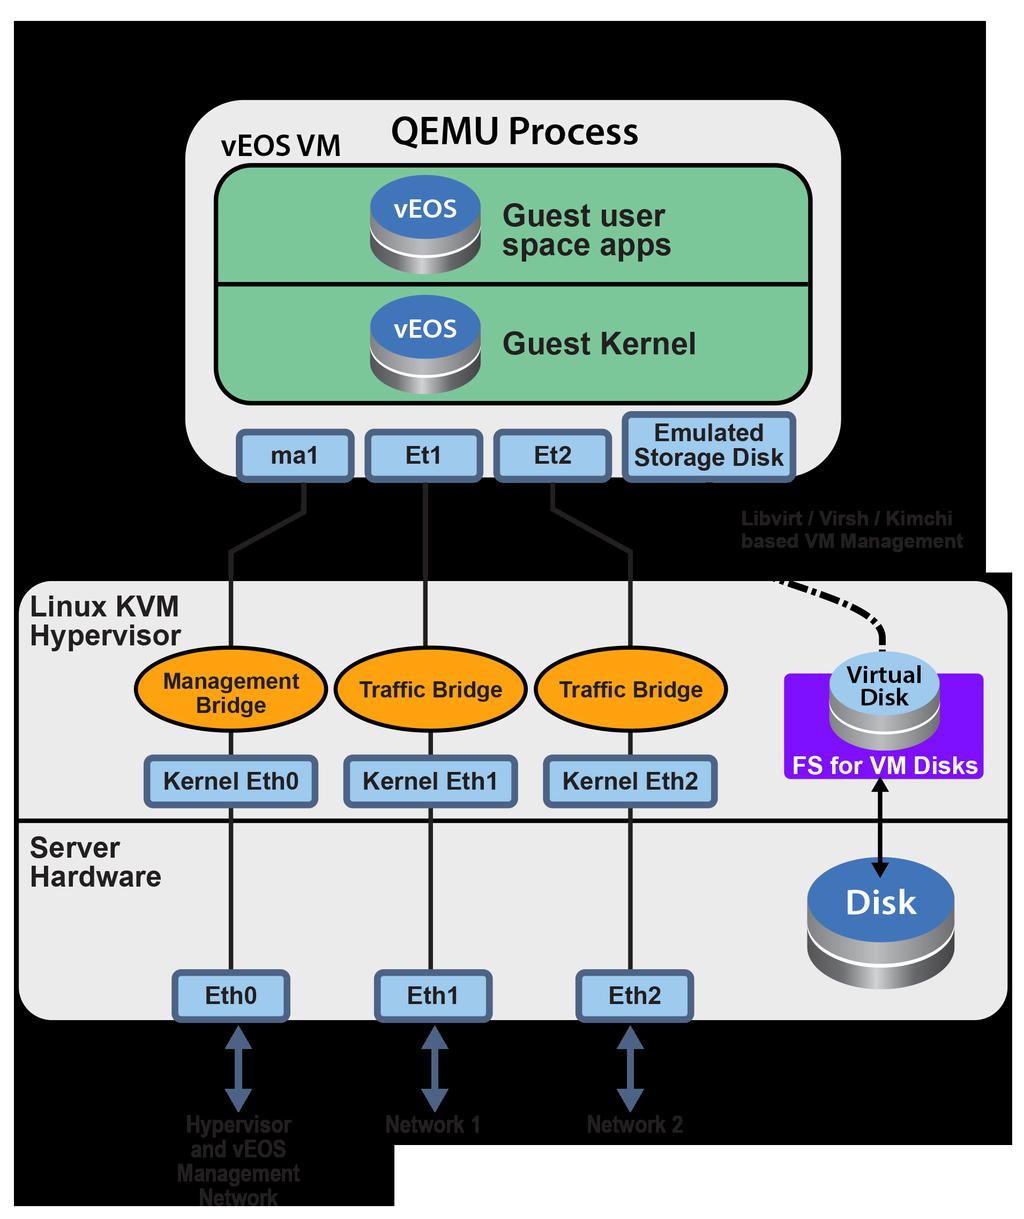 veos can employ para-virtualized network I/O interfaces, which in Linux KVM is also known as Virtio.